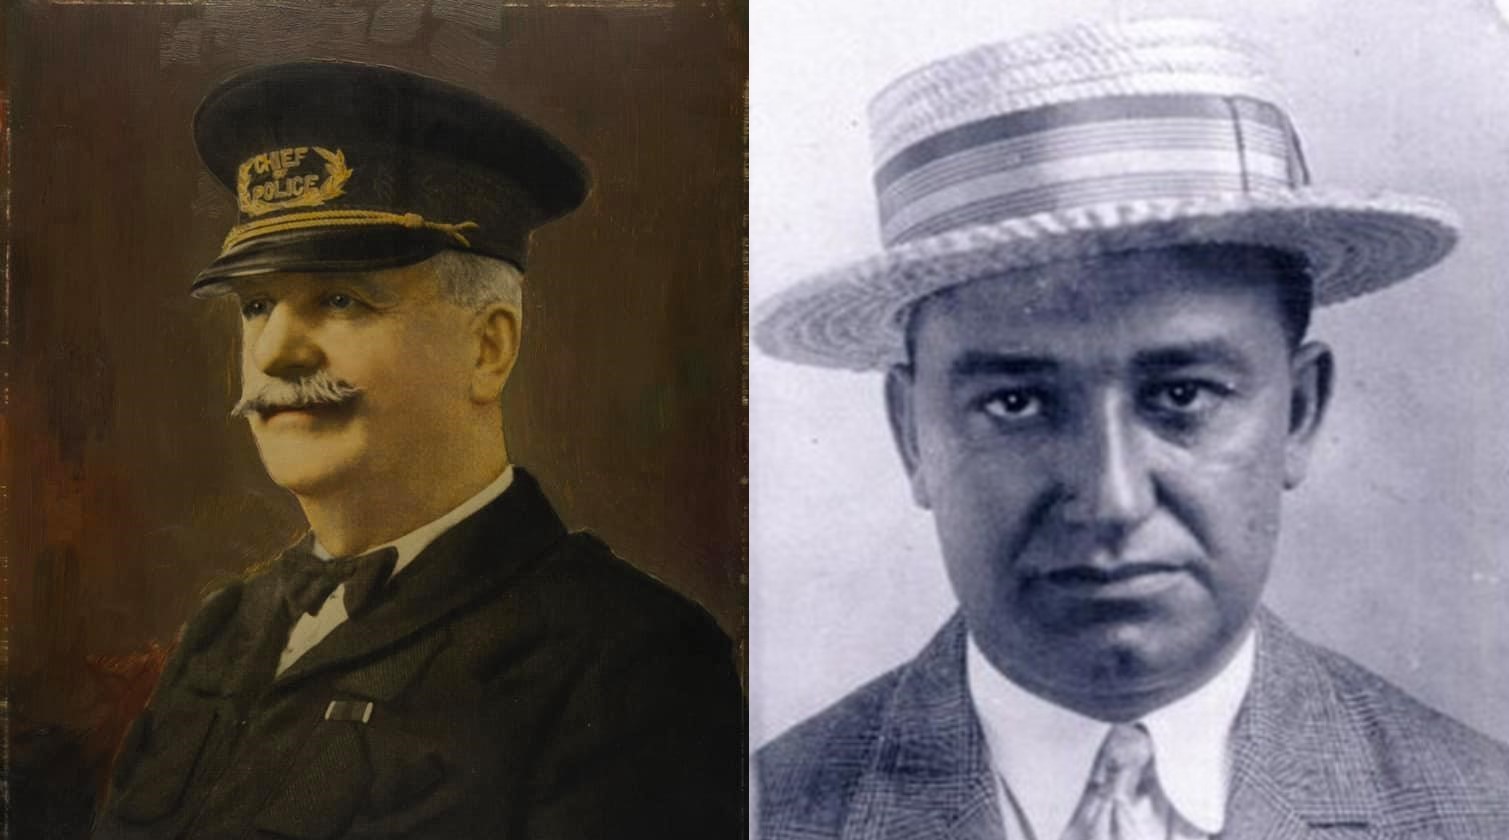 colourized head shot of a police officer in uniform side-by-side with a black and white head shot of a sharply dressed Italian man wearing a suit and straw hat